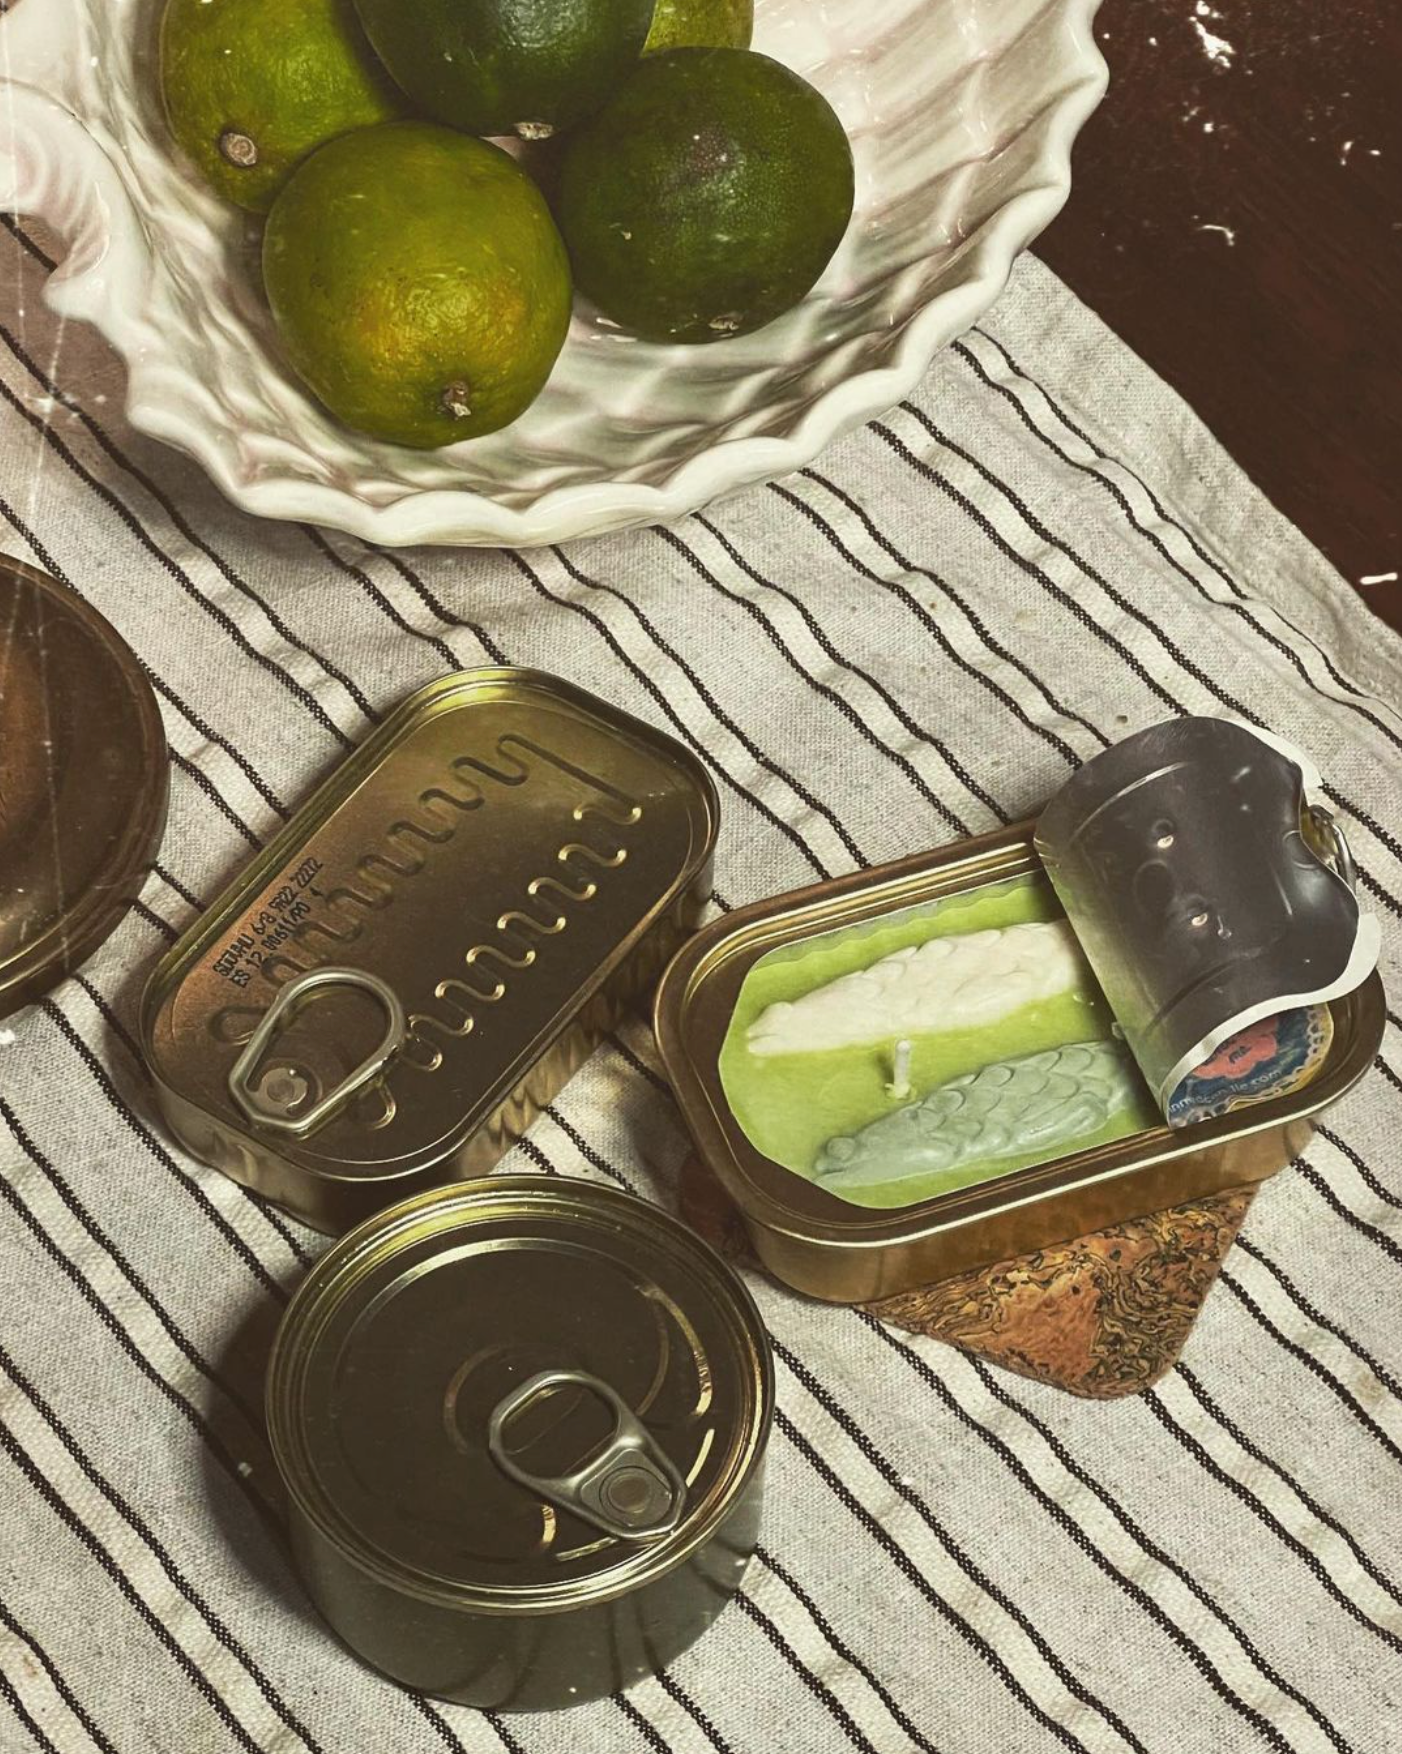 Opened tinned fish candle next to two closed tin cans 